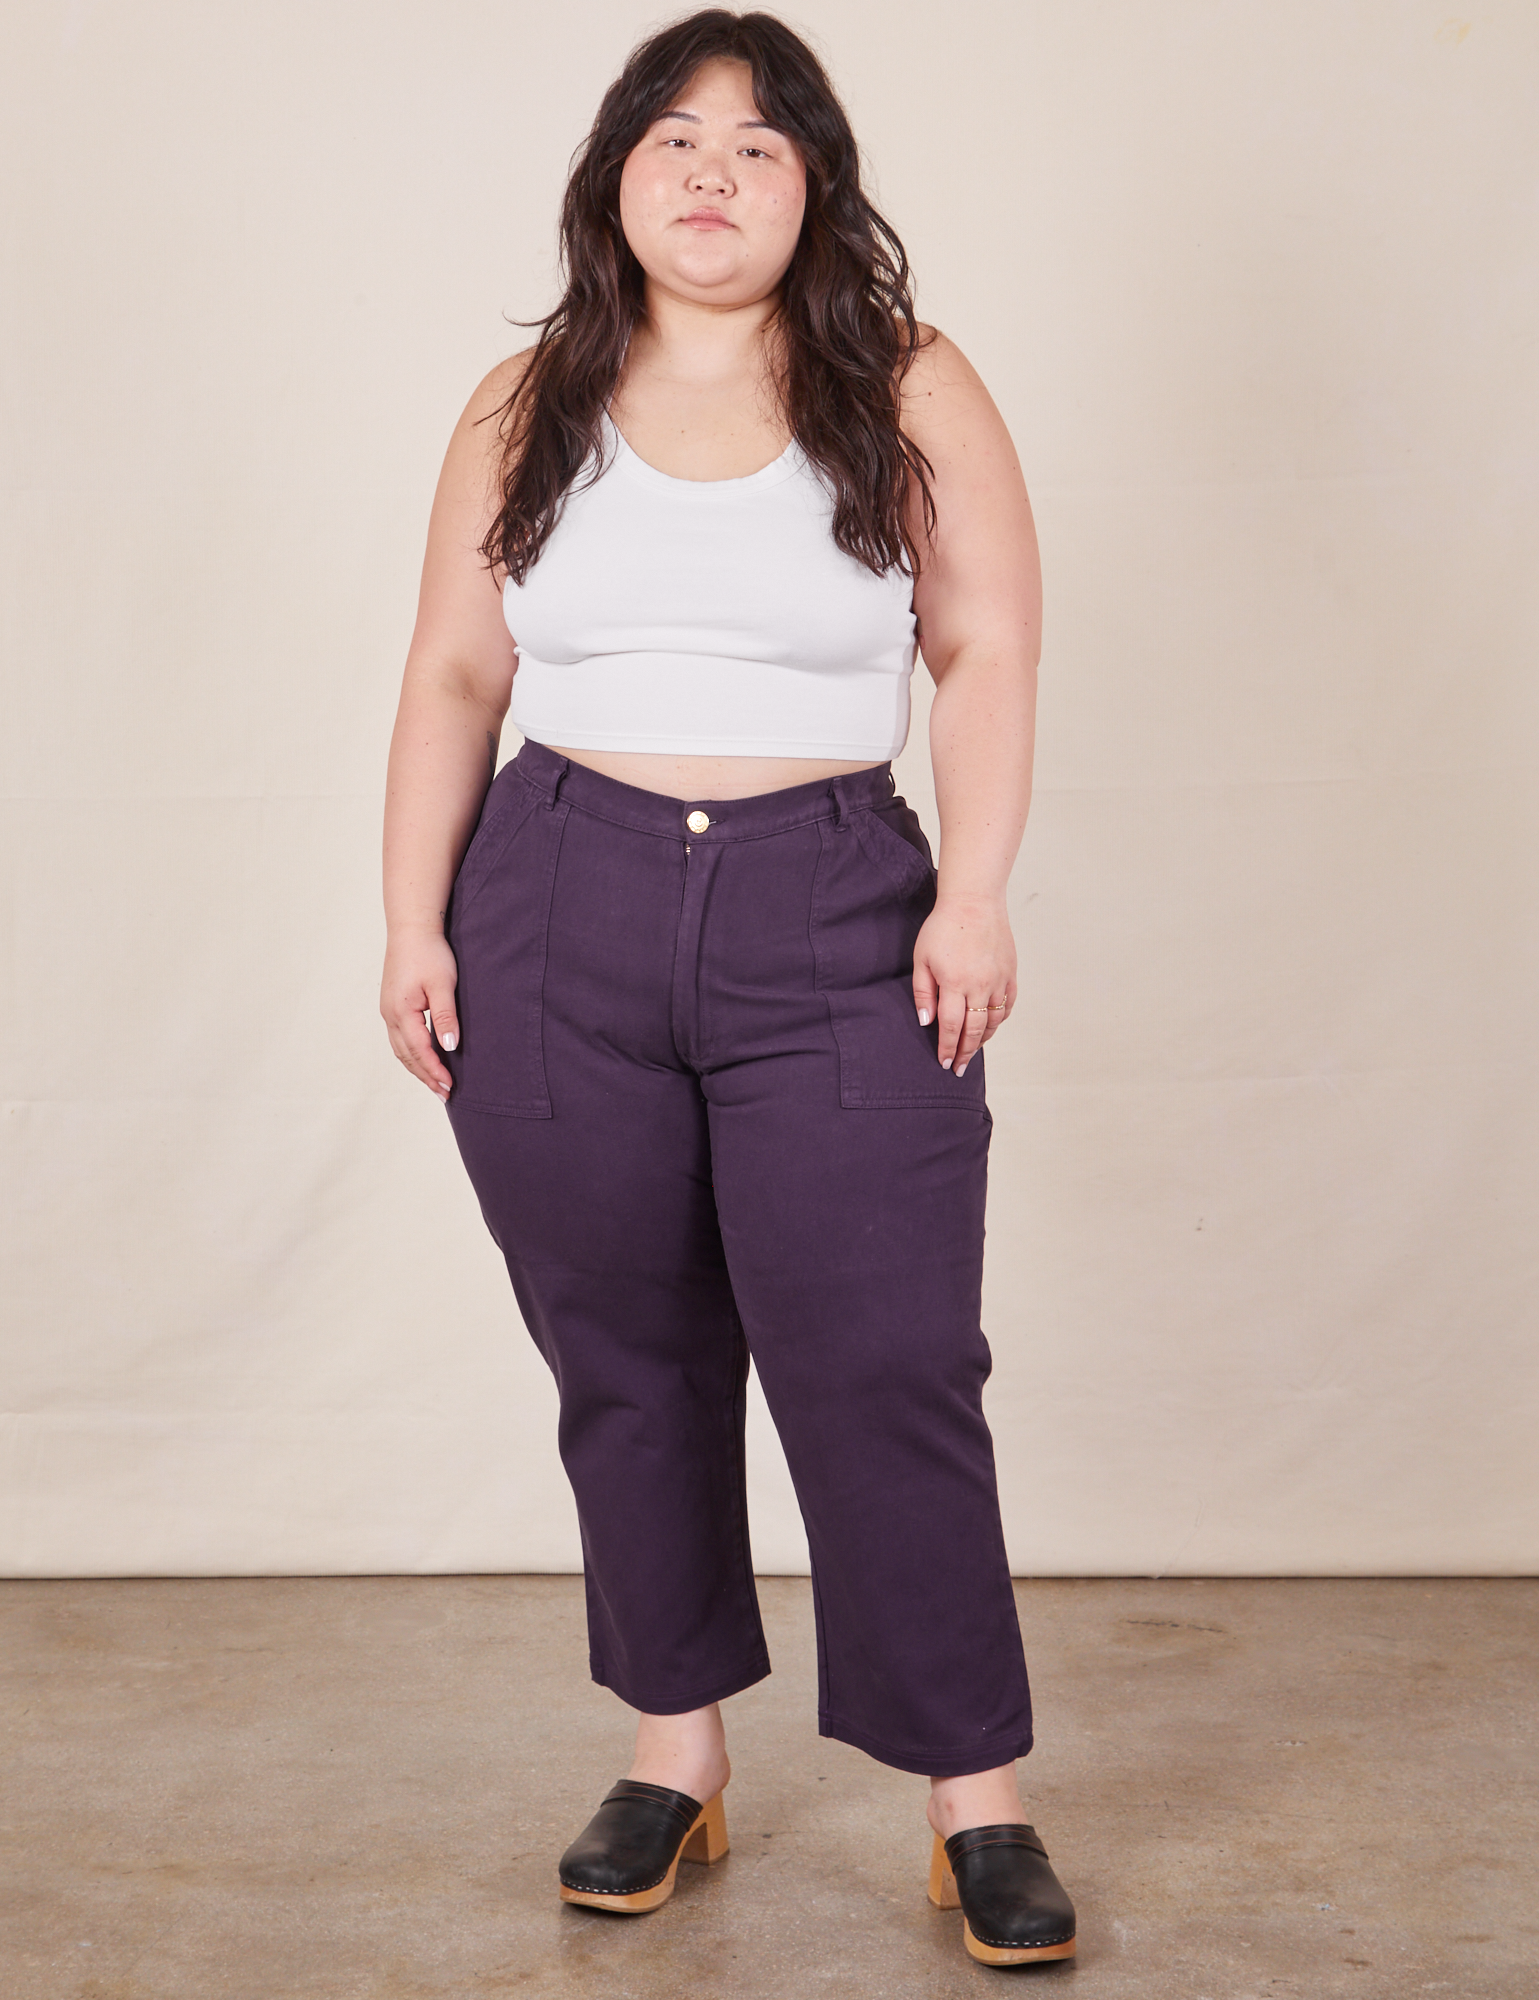 Ashley is 5&#39;7&quot; and wearing 1XL Petite Work Pants in Nebula Purple and Halter Top in vintage tee off-white